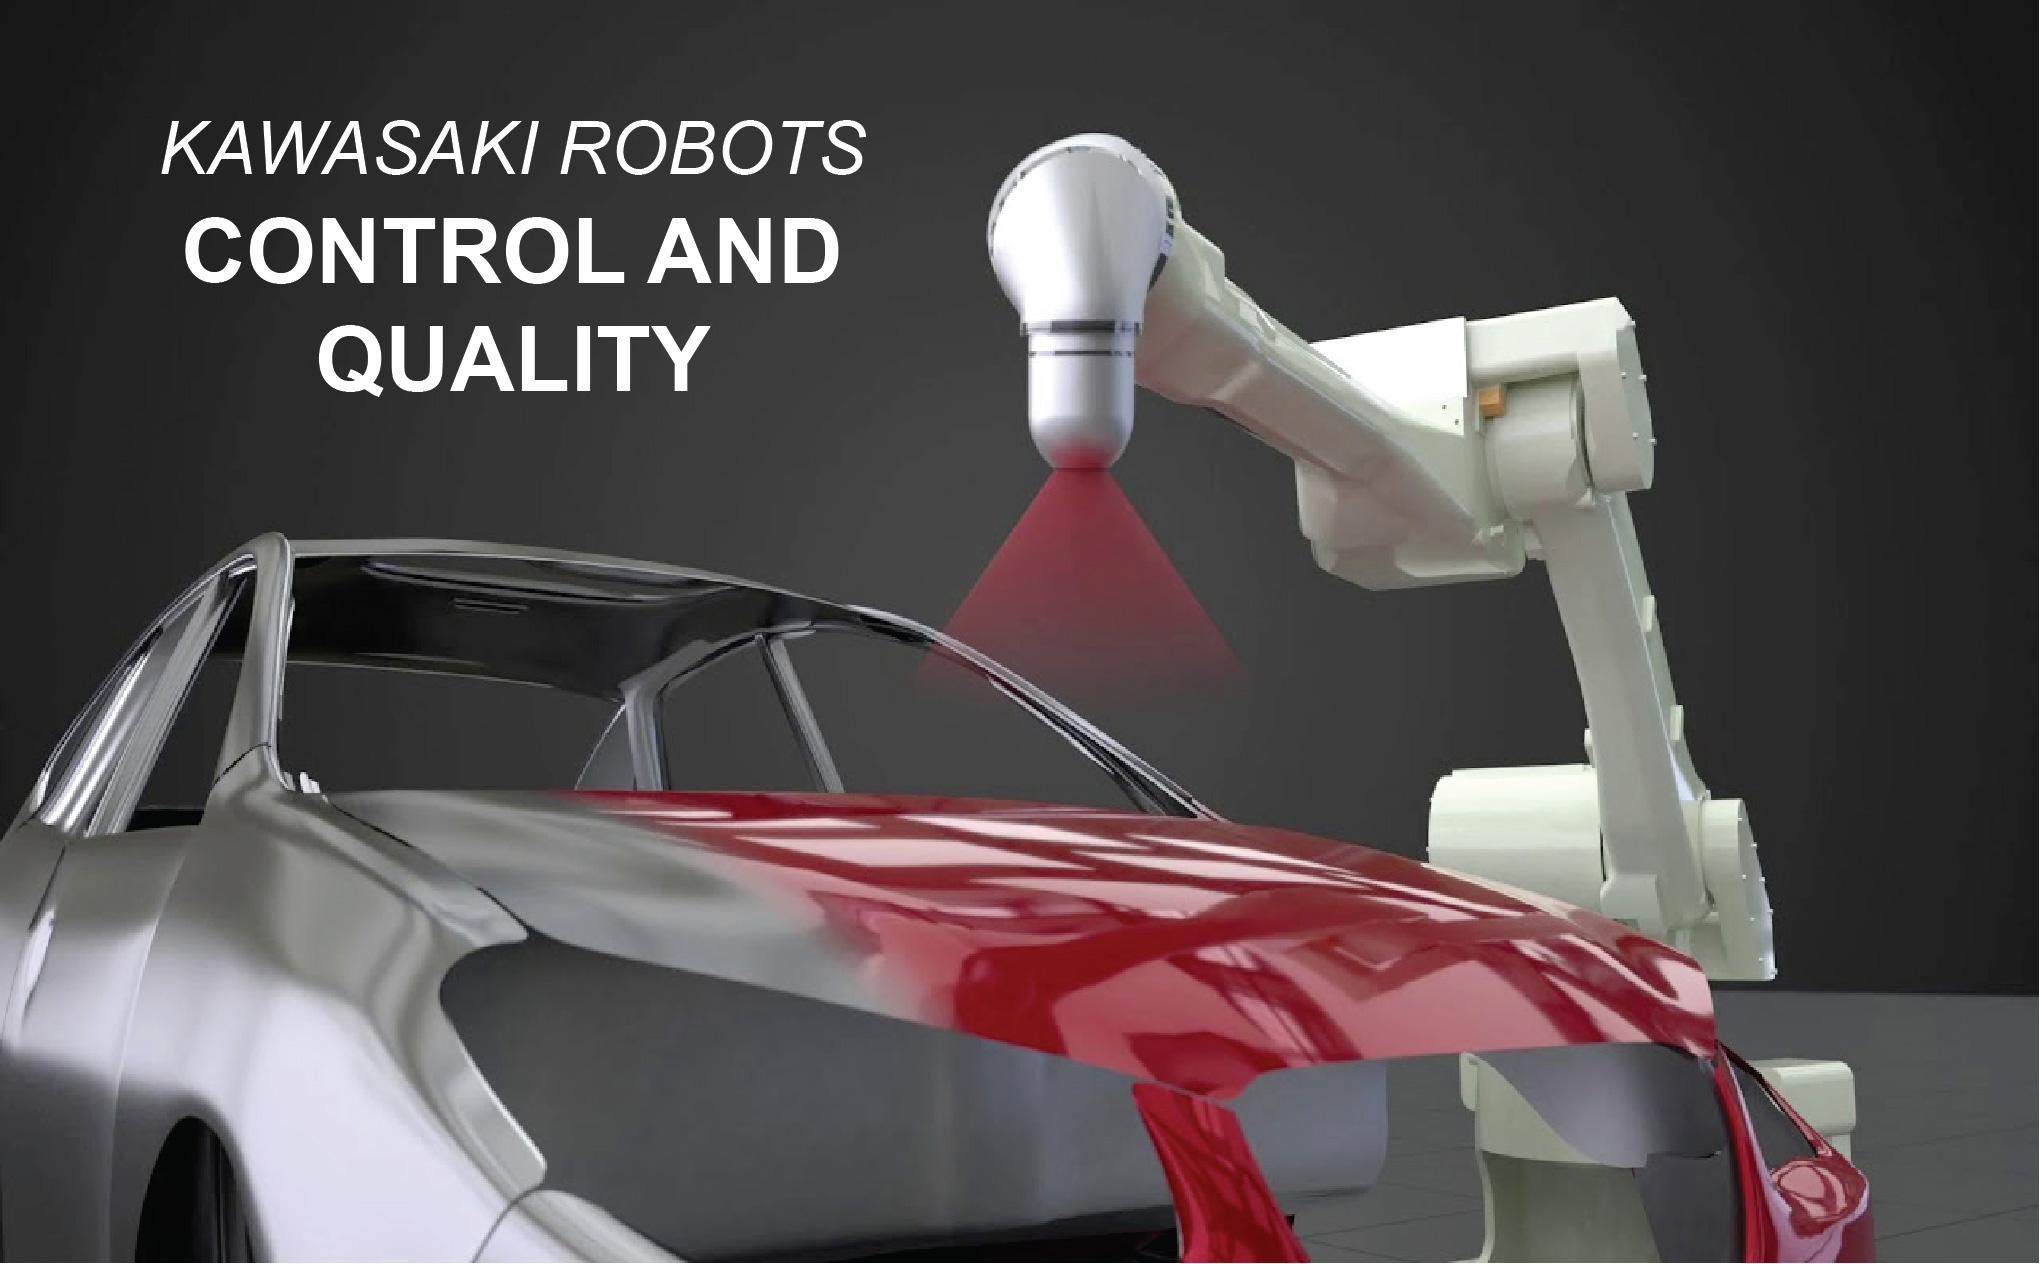 Kawasaki Robotic Painting Delivers the Control and Quality Customers - CIMTEC Automation Blog